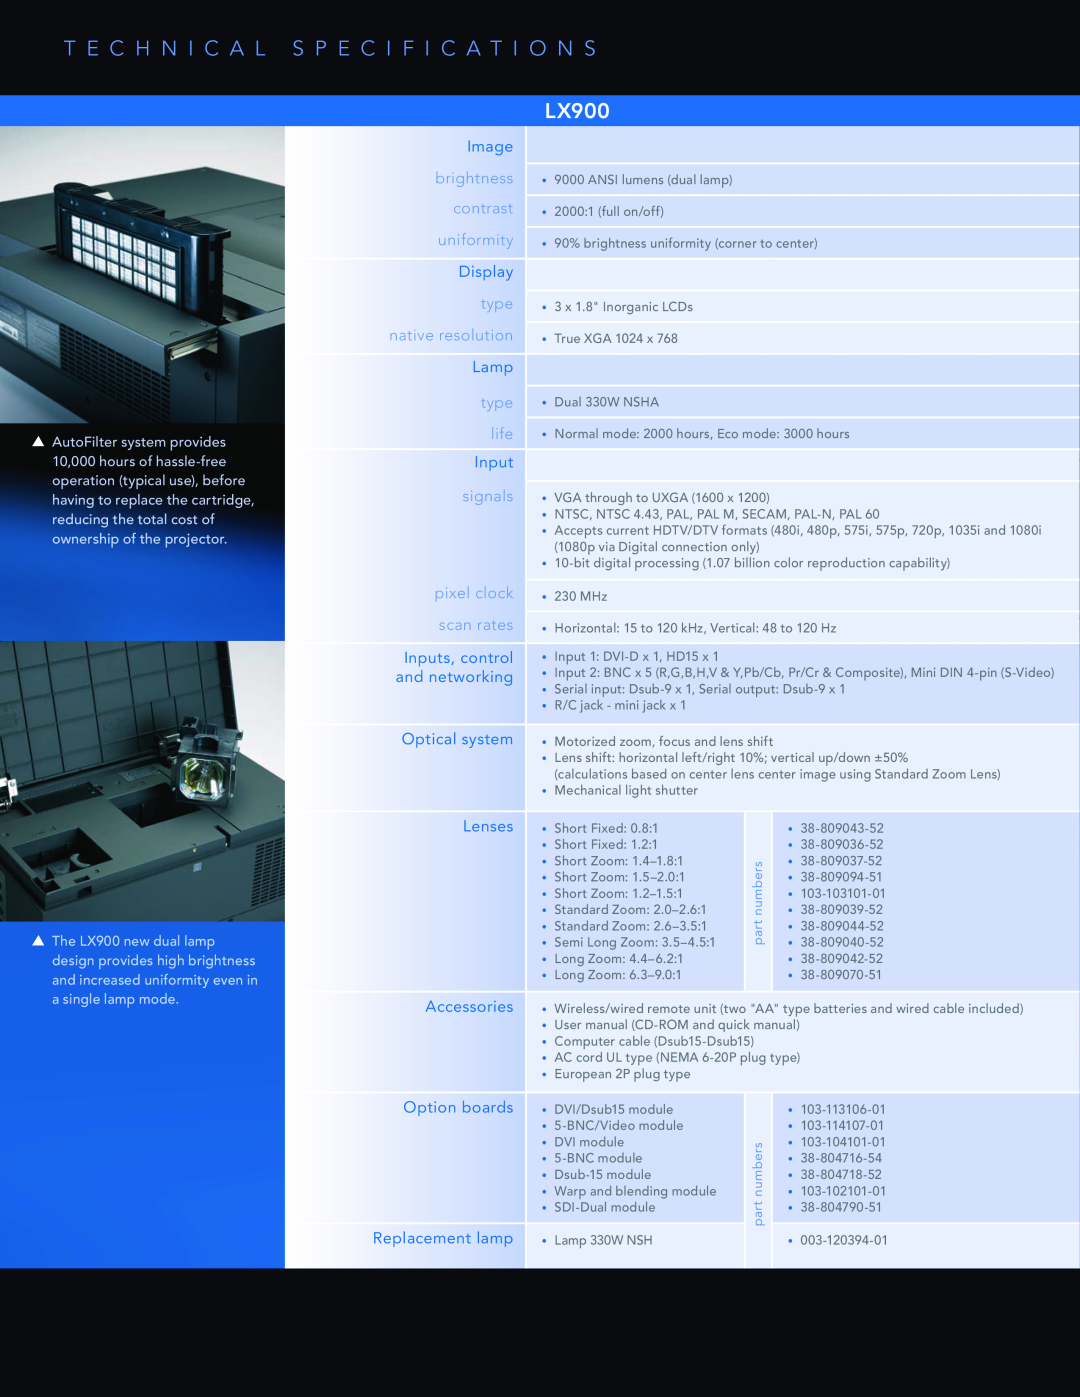 Christie Digital Systems LX900 Image, Display, Lamp, Inputs, control, and networking, Optical system, Lenses, contrast 